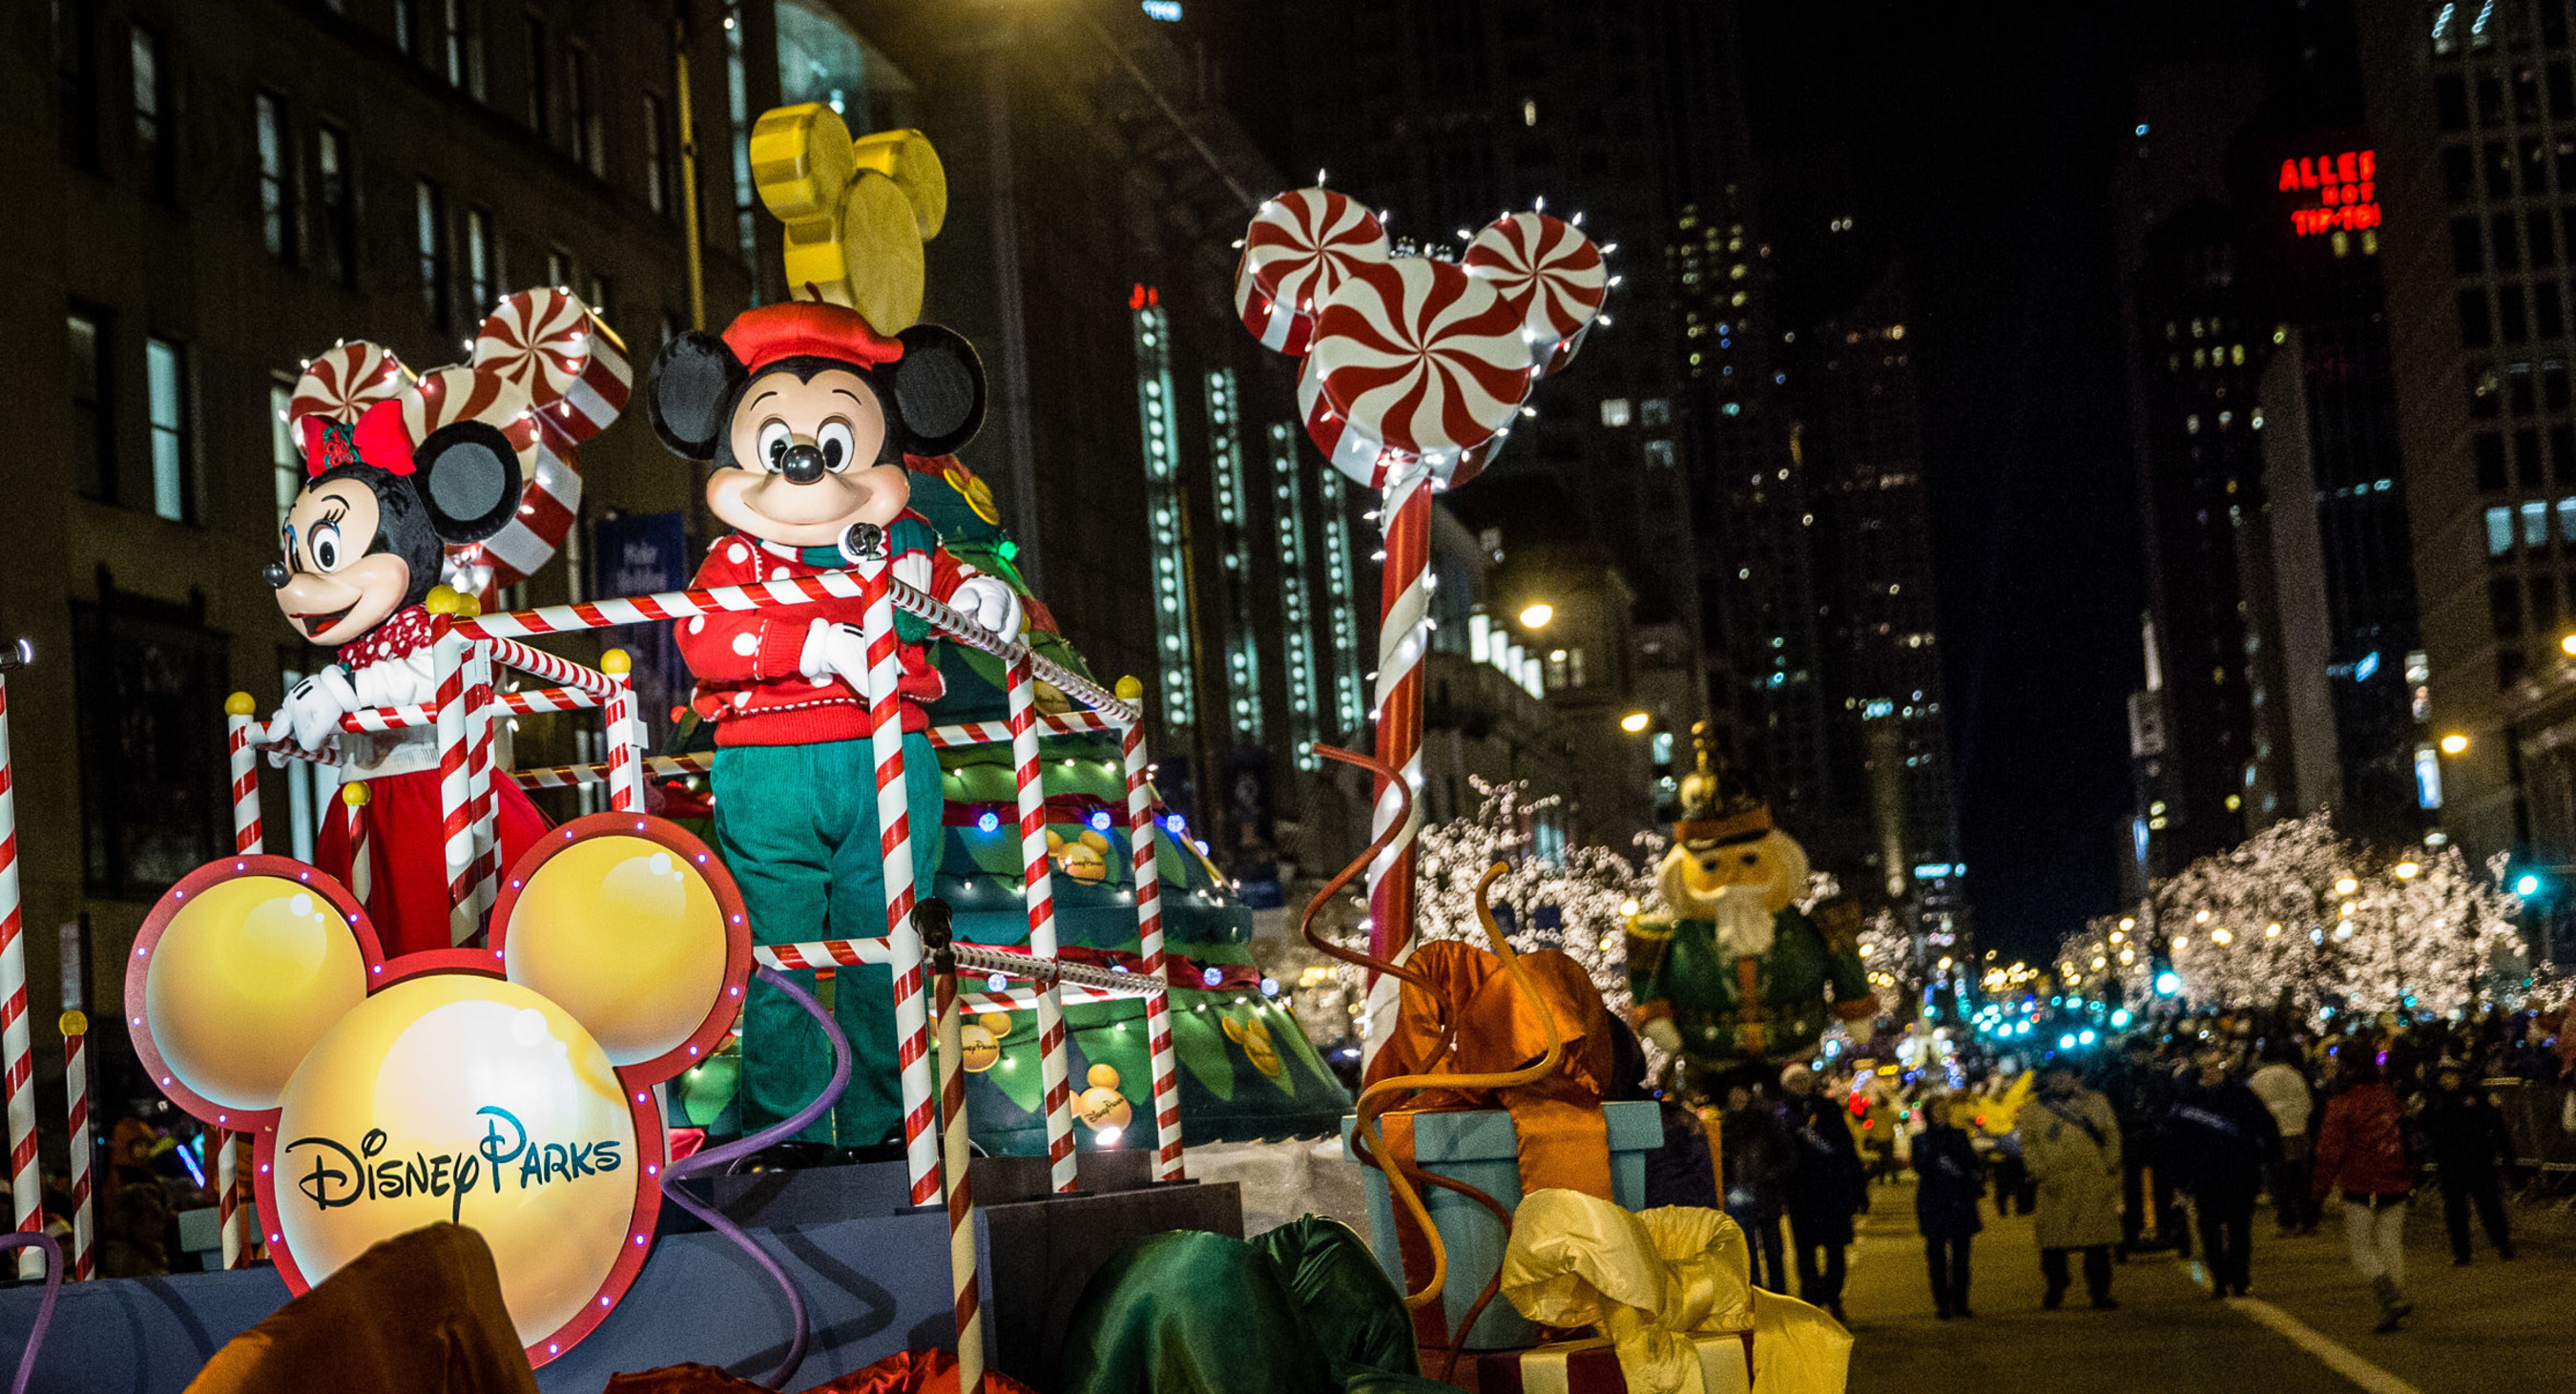 Grand Marshals Mickey Mouse and Minnie Mouse from the Walt Disney World(R) Resort in Florida lead a magical tree-lighting parade down North Michigan Avenue in Chicago, illuminating more than one million lights! The BMO Harris Bank Magnificent Mile Lights Festival kicks off the holiday season for the nation. For more information, visit www.TheMagnificentMile.com .